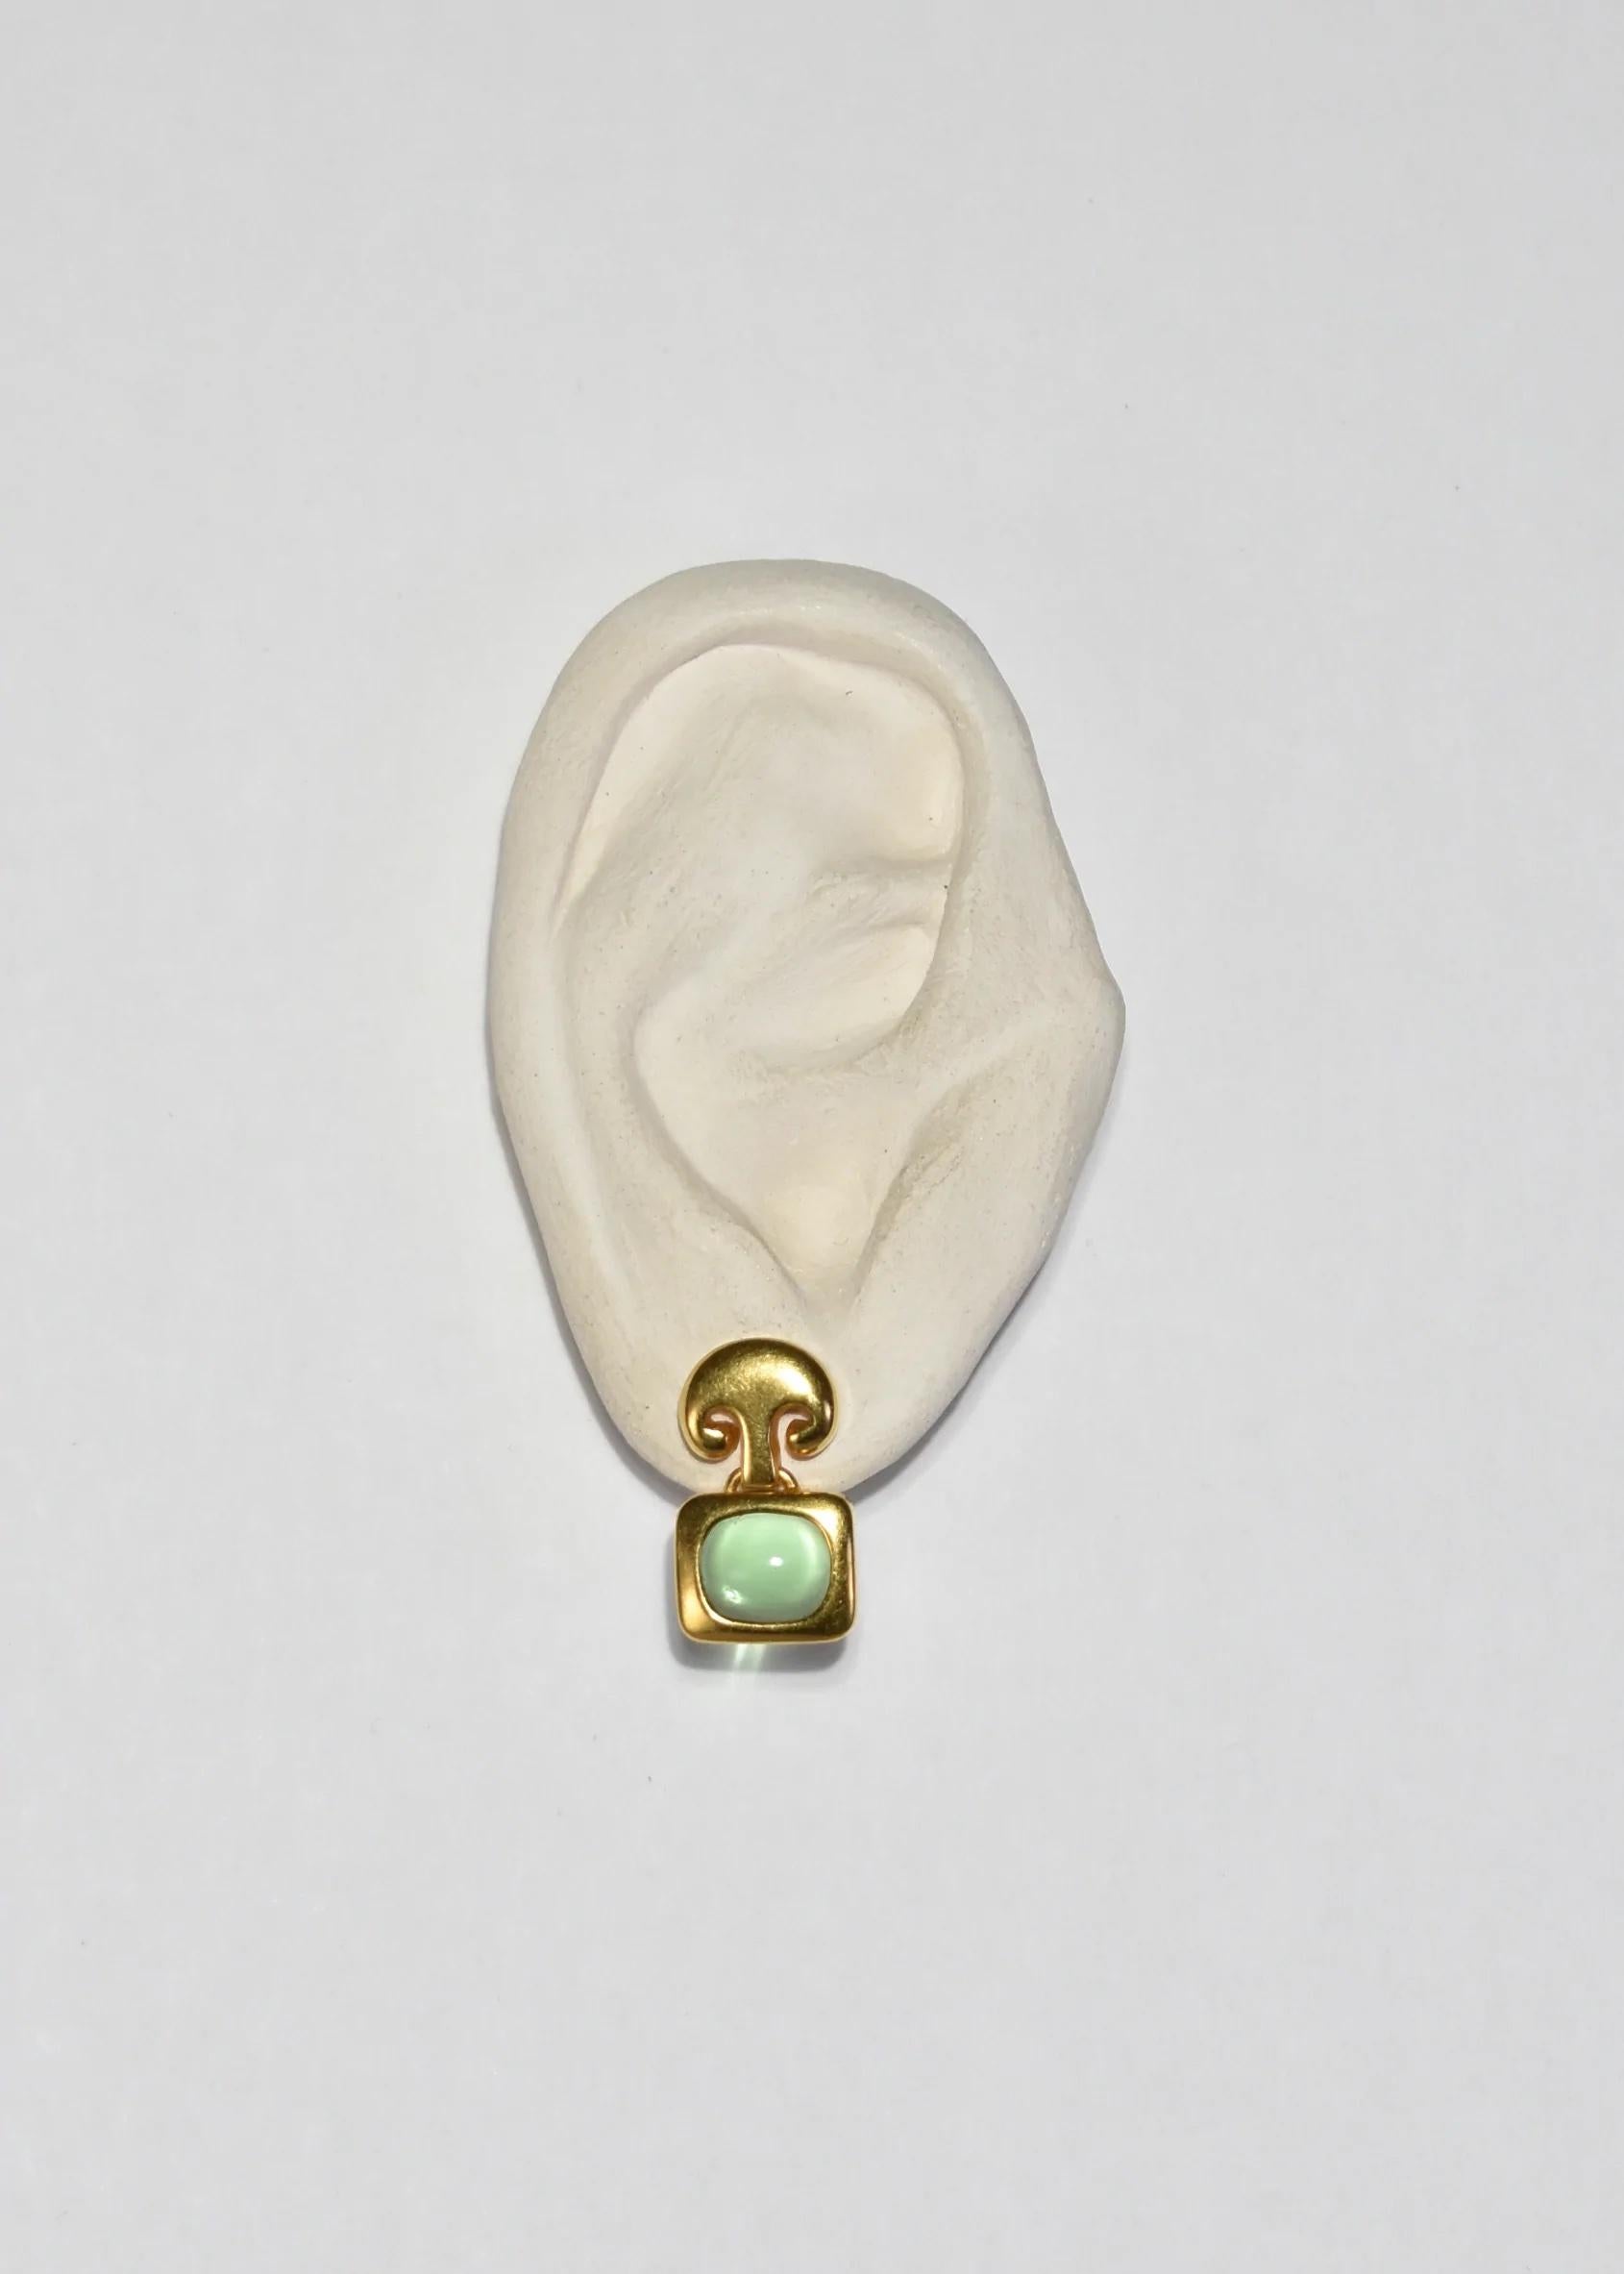 Gold Etruscan style earrings with light green glass cabochons. Stamped ﻿MMA.

﻿Material: Metal, glass.